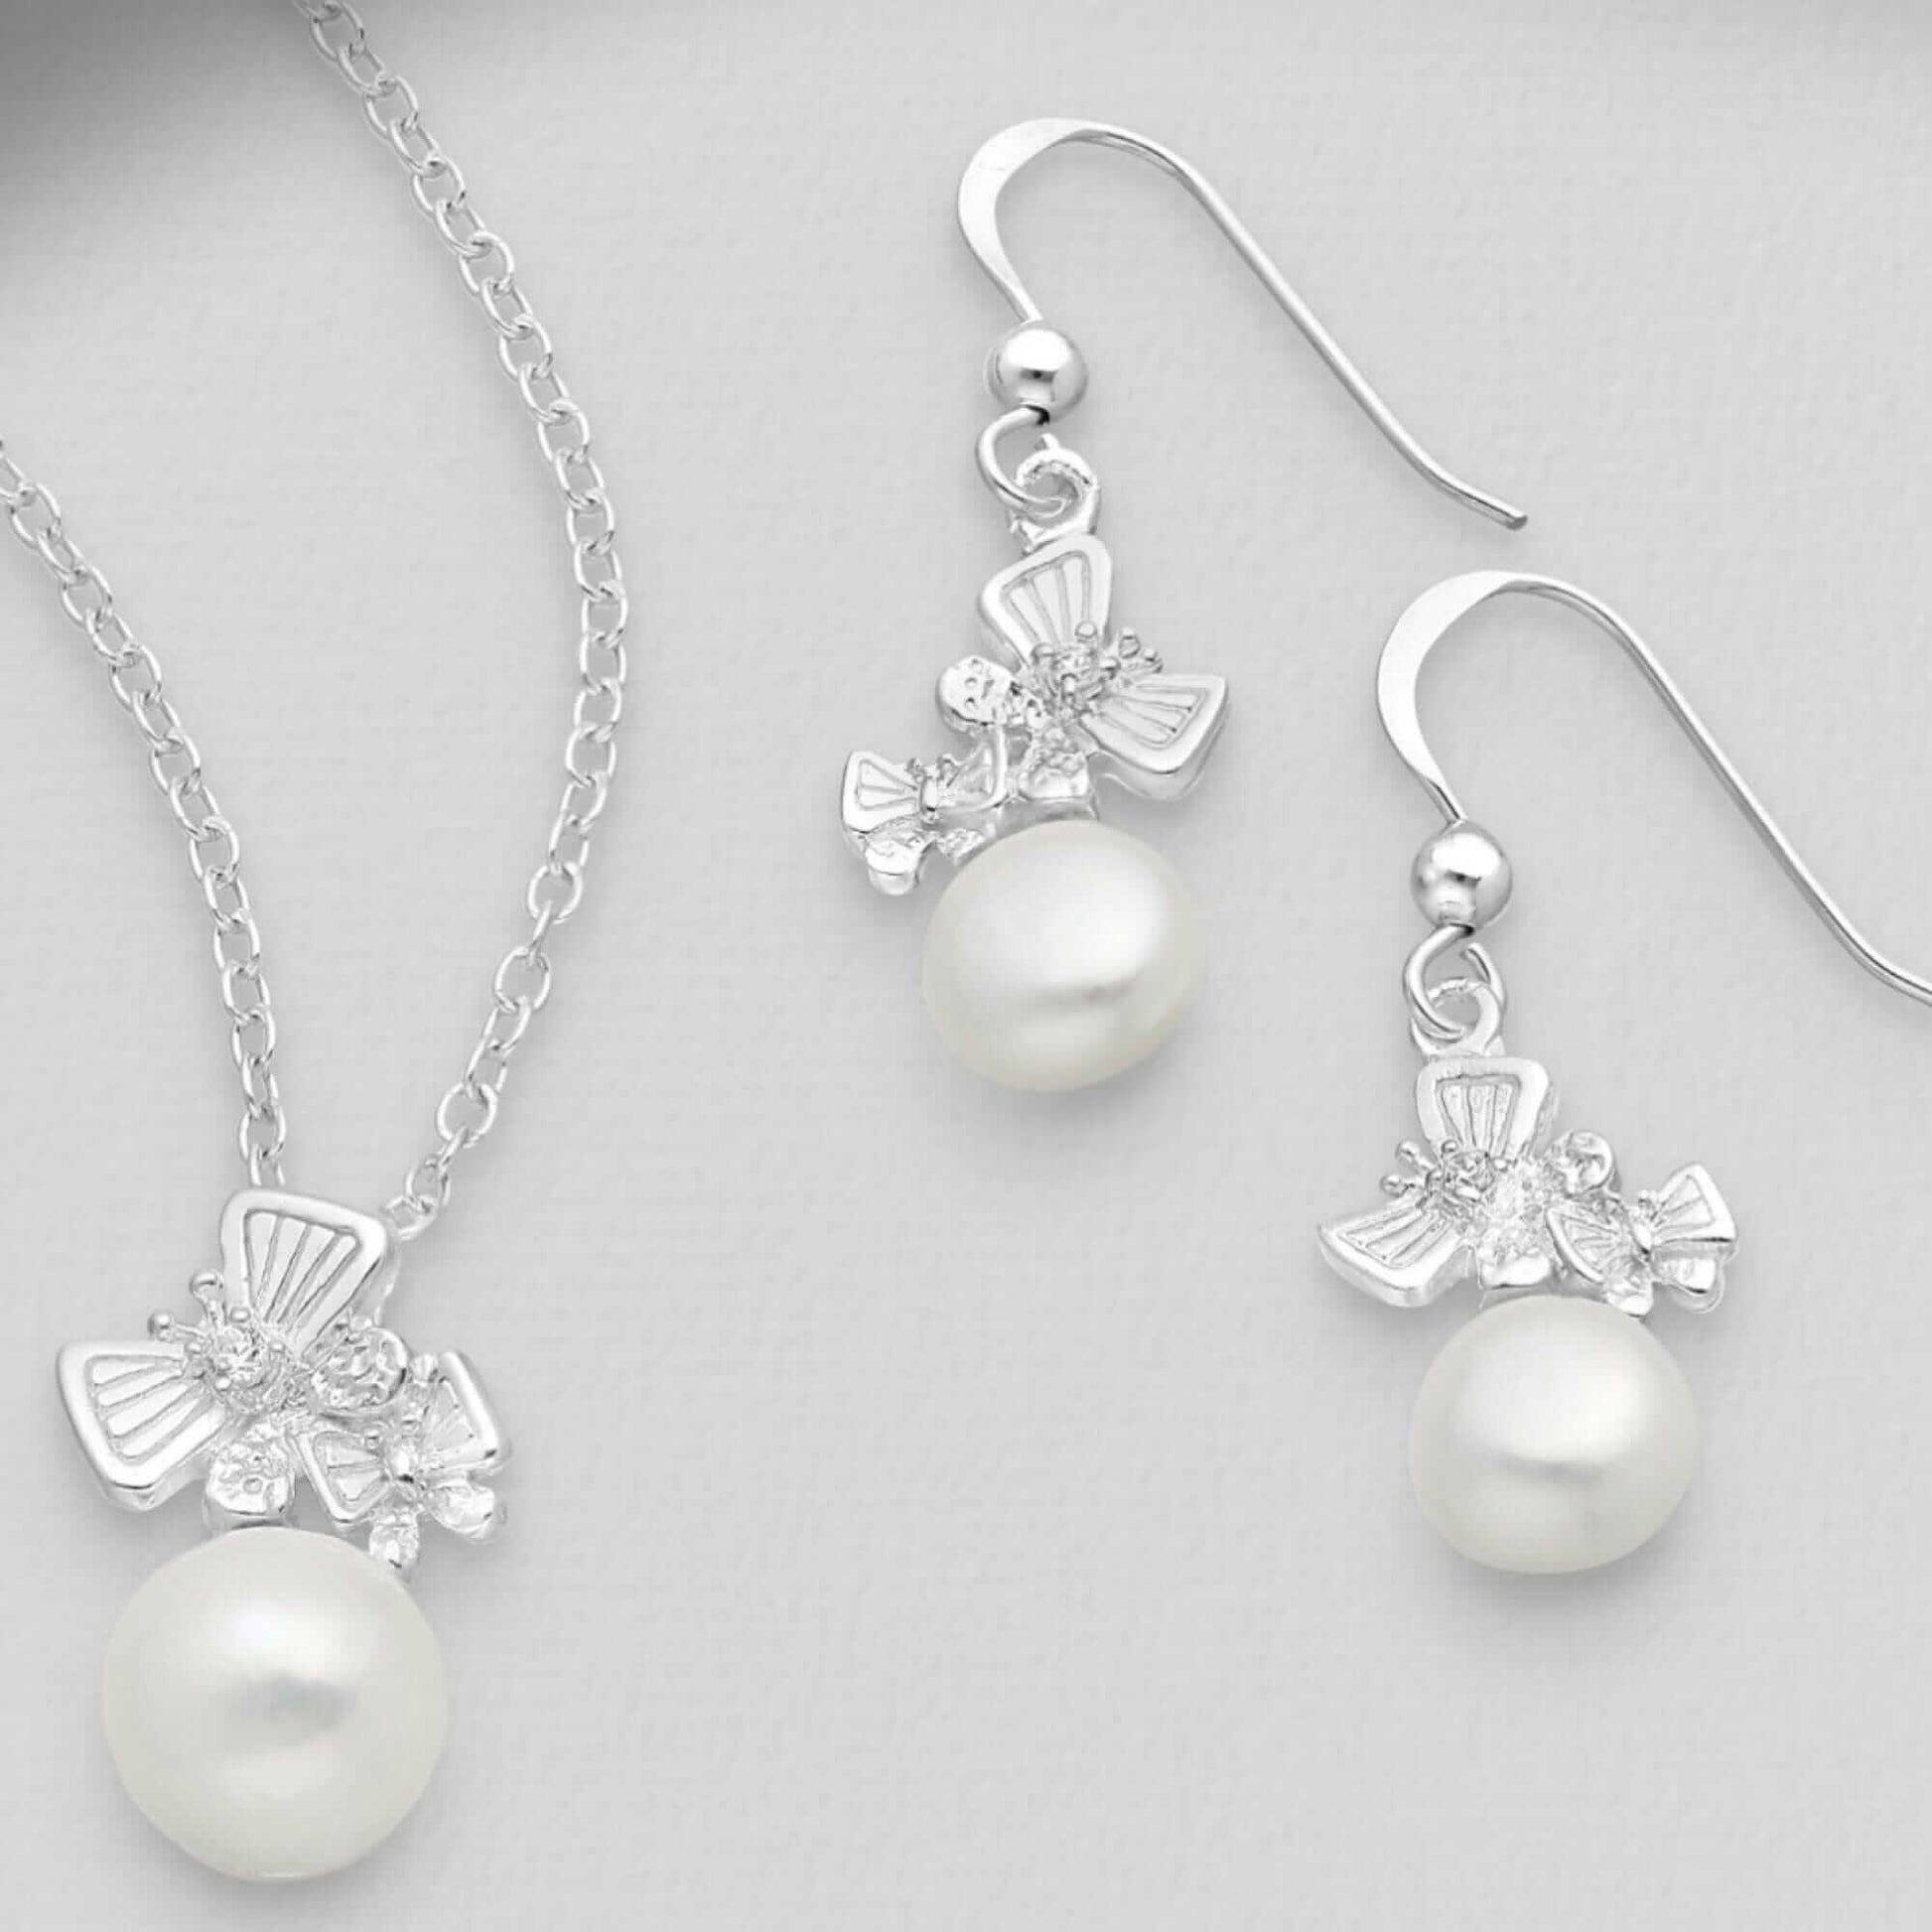 Sterling Silver Butterfly Hook Earrings and Pendant, with Freshwater Pearls and CZ - Twelve Silver Trees